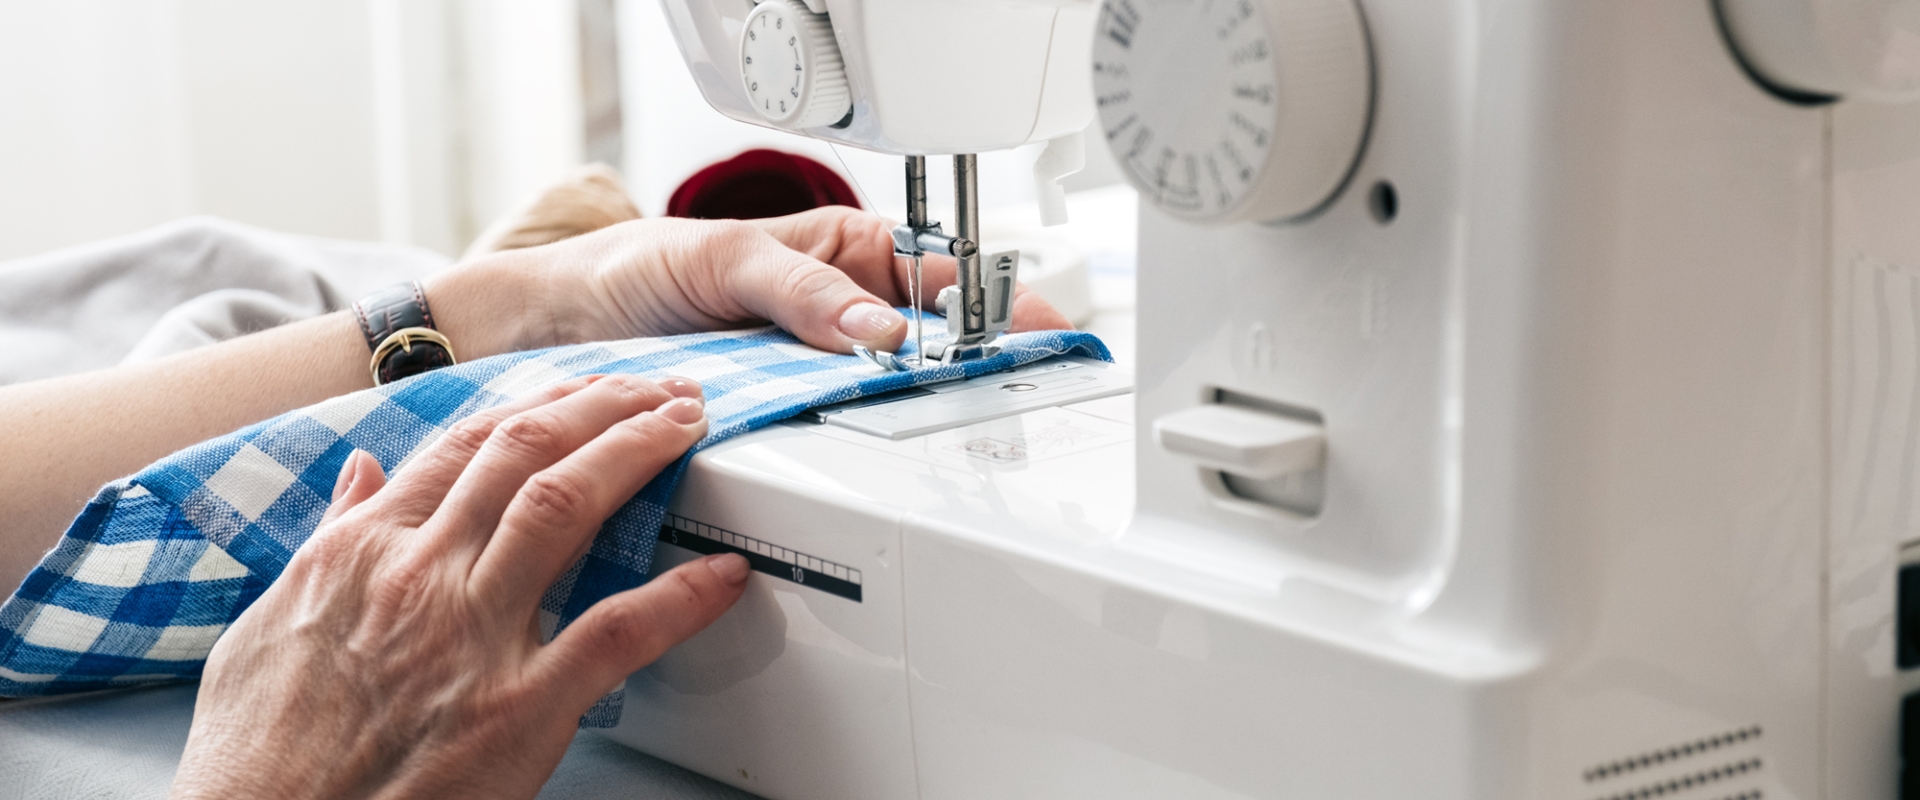 Sewing Clothing